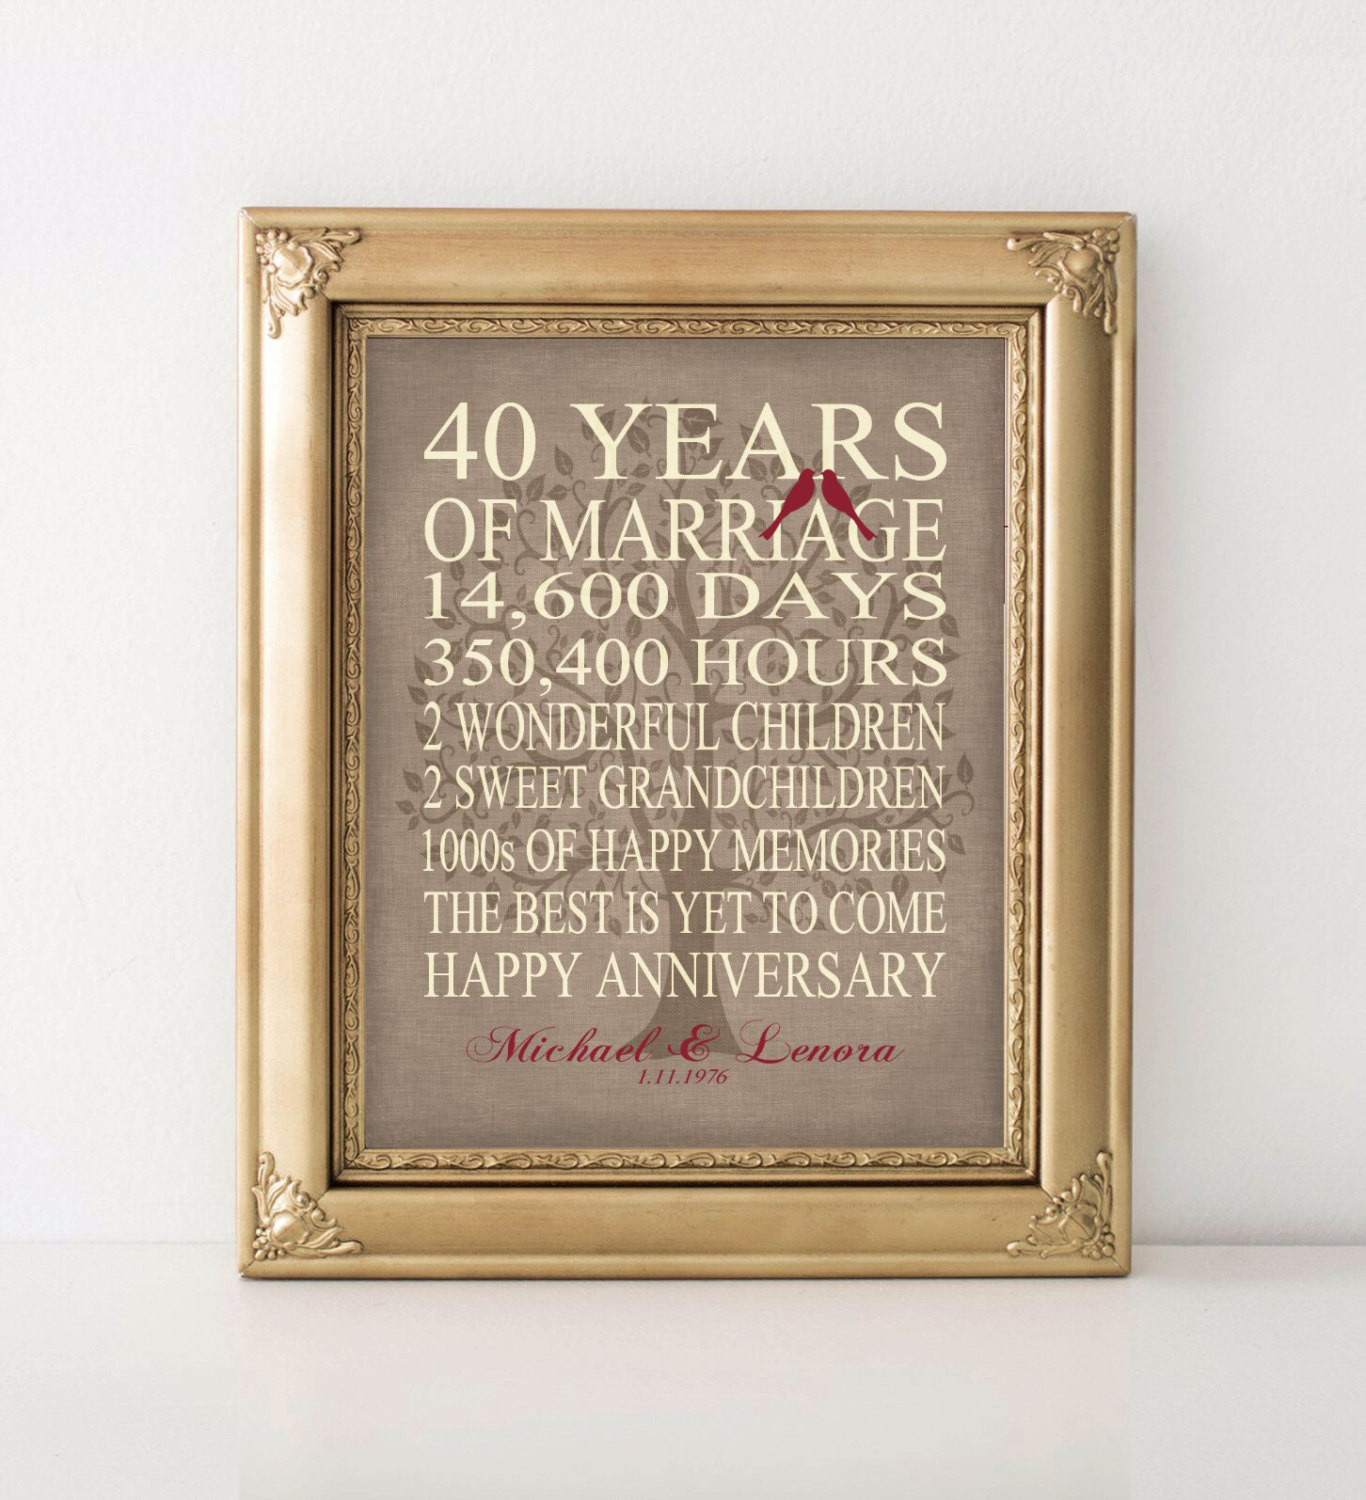 40th Wedding Anniversary Traditional Gift
 Wedding Anniversary Gift 40th Anniversary Gift Personalized